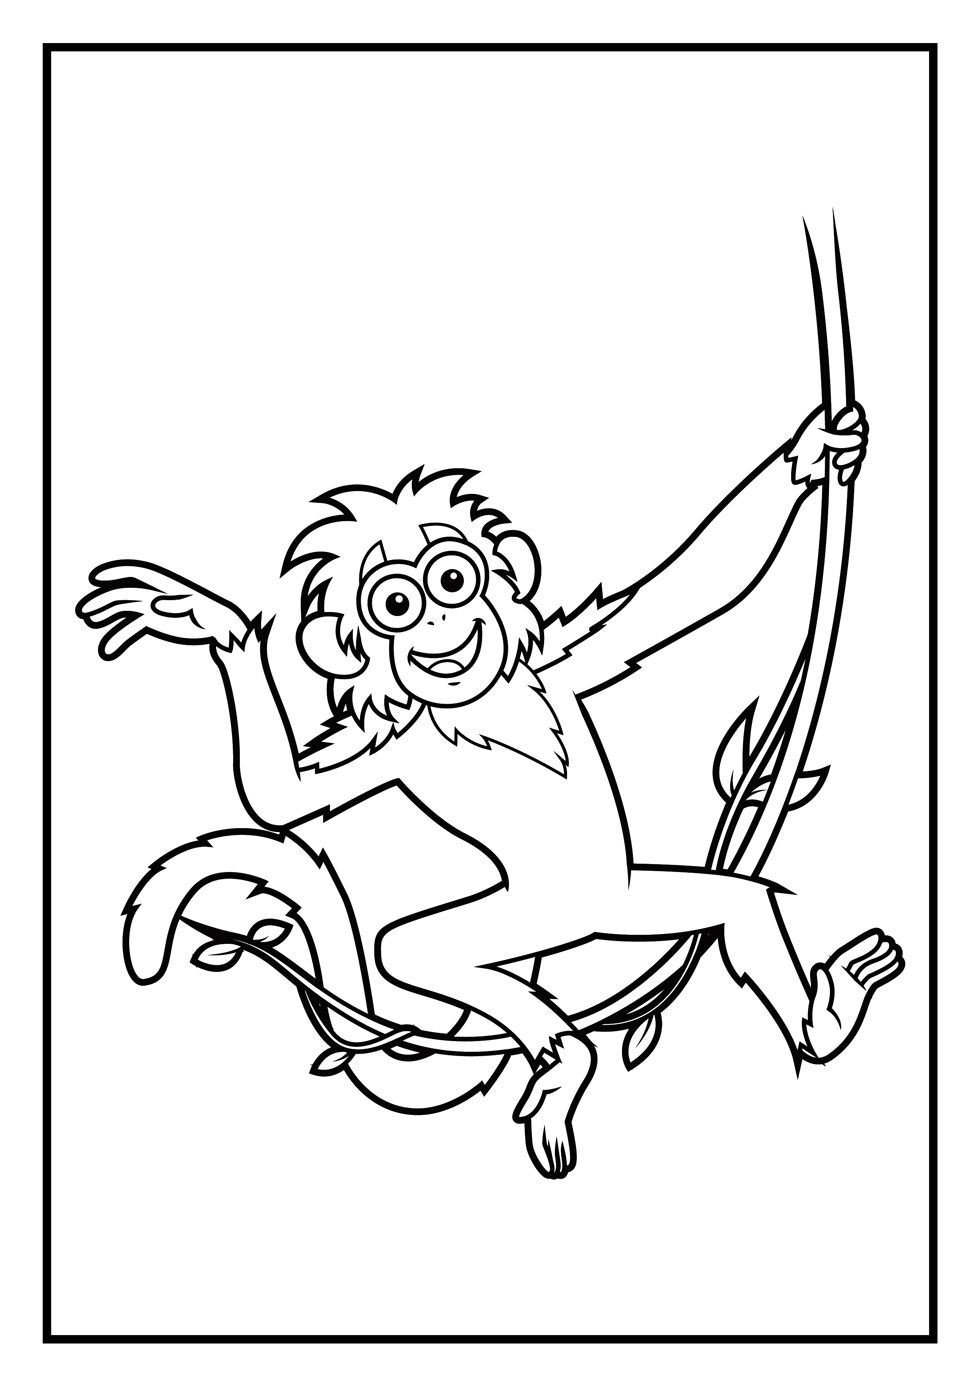 Dora Coloring Pages | Diego Coloring Pages